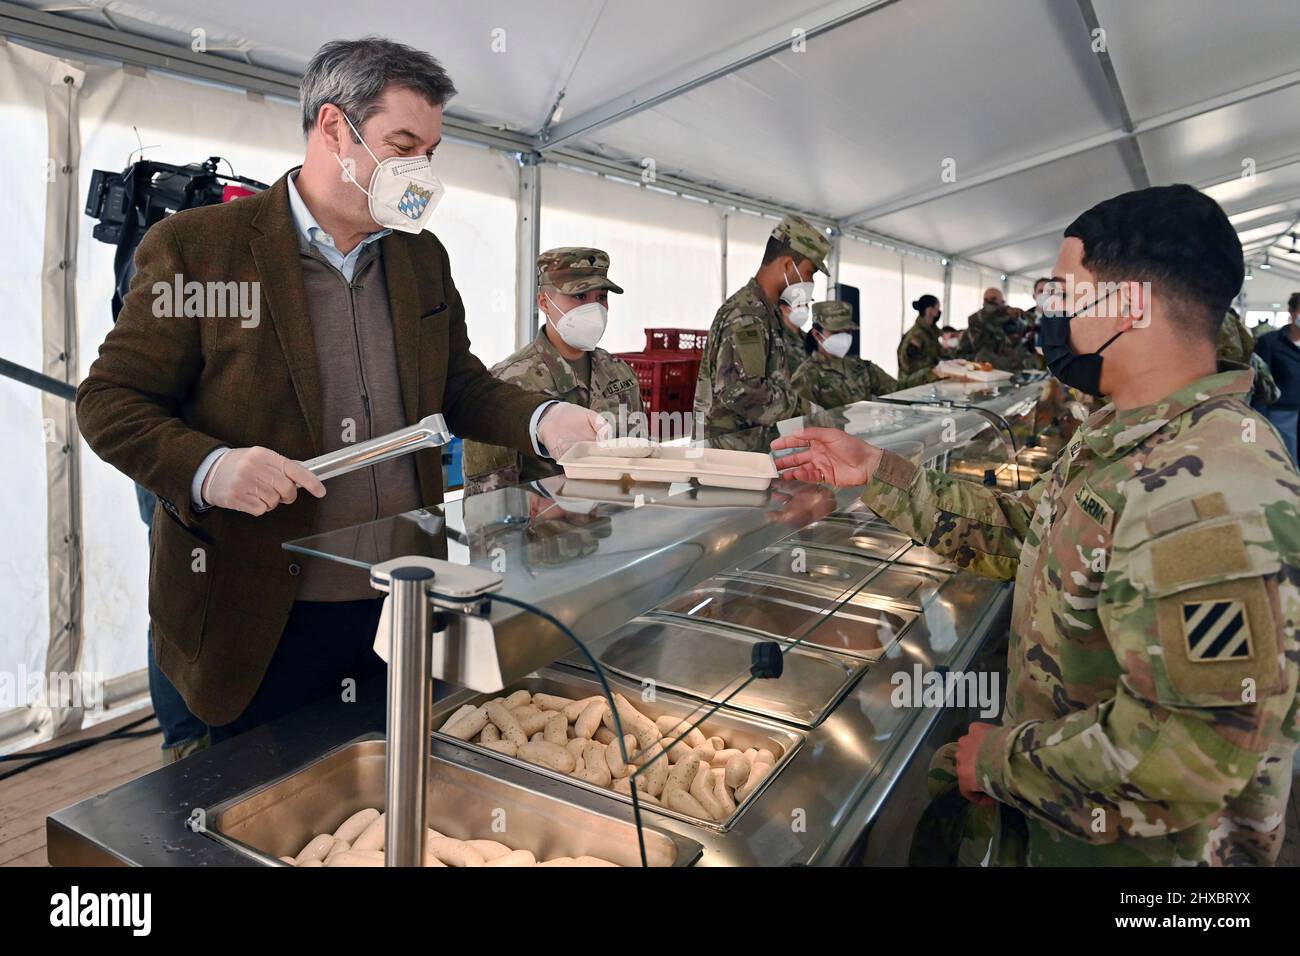 Markus SOEDER (Prime Minister of Bavaria and CSU Chairman) at the food distribution at the Weisswurst counter, Weisswurst Essen.Bavarian Weisswurst breakfast. Prime Minister Dr. Markus Soeder visits the US military training area Grafenwoehr, headquarters of the 7th Army Training Command on March 11th, 2022. Stock Photo